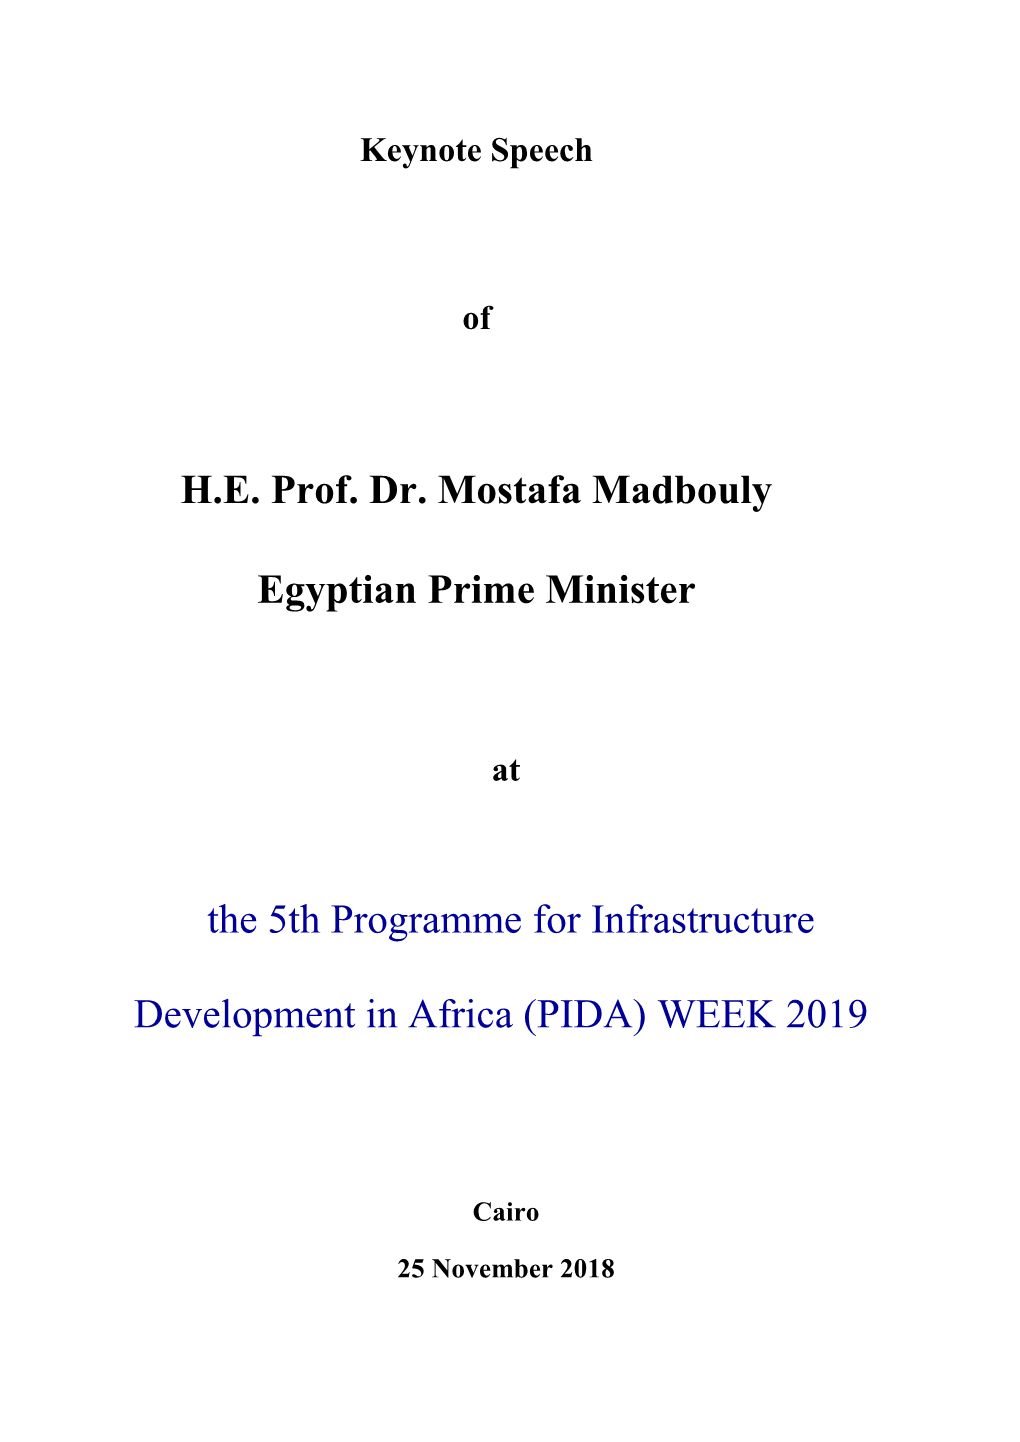 Keynote Speech of H.E. Prof. Dr. Mostafa Madbouly Egyptian Prime Minister at the 5Th PIDA Week